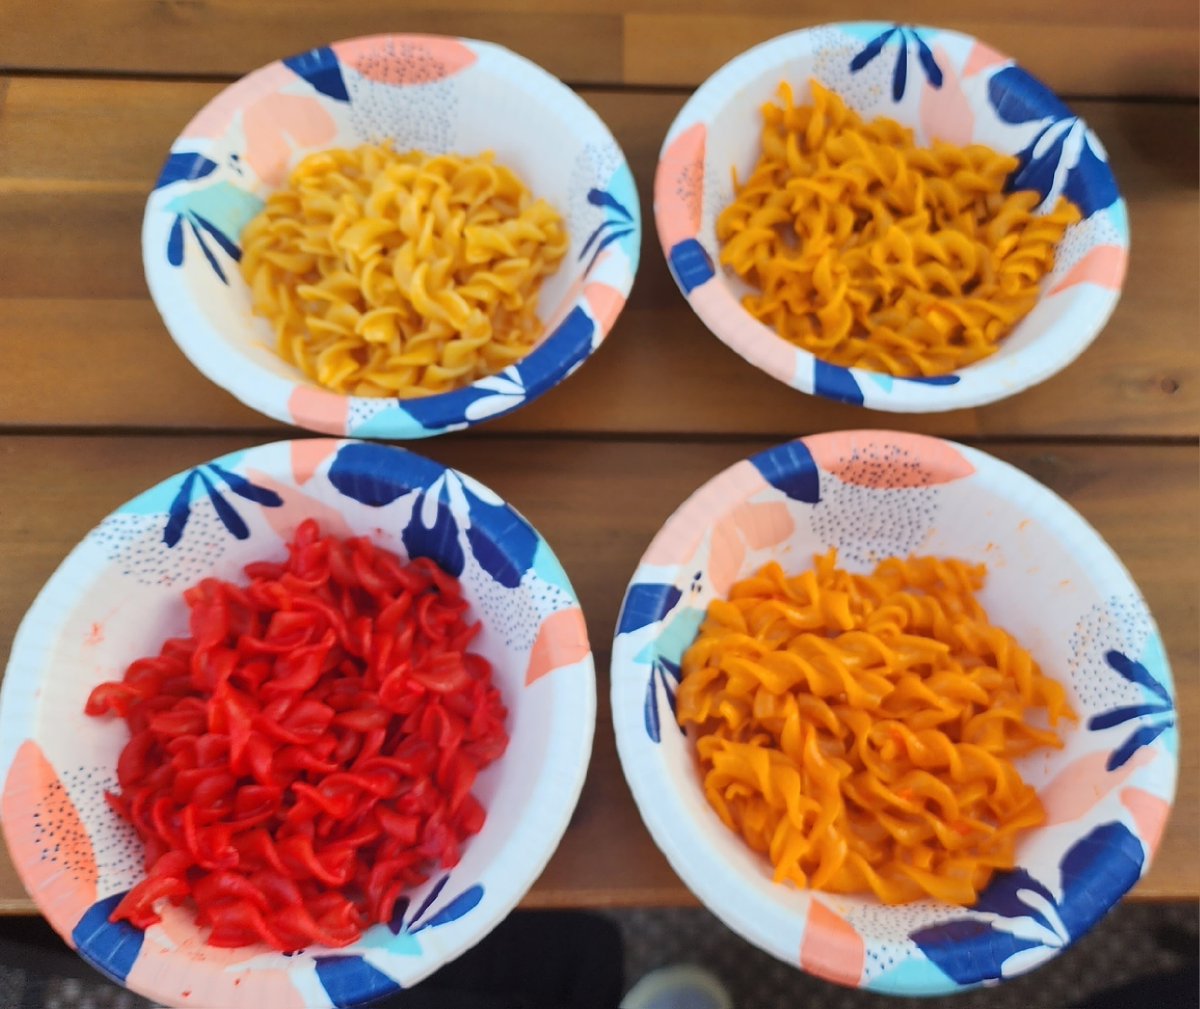 NJ Ladies Hoops 'FOOD FEAST OF THE DAY' Son & lady friend hosted me for this MACARONI & CHEESE tasting contest featuring the 4 new @CHEETOS brand flavors. Must better than Kraft and hot ones are HOT. The Cheesy Bacon flavor was the Home Run flavor. I wiped out all w/ a smile